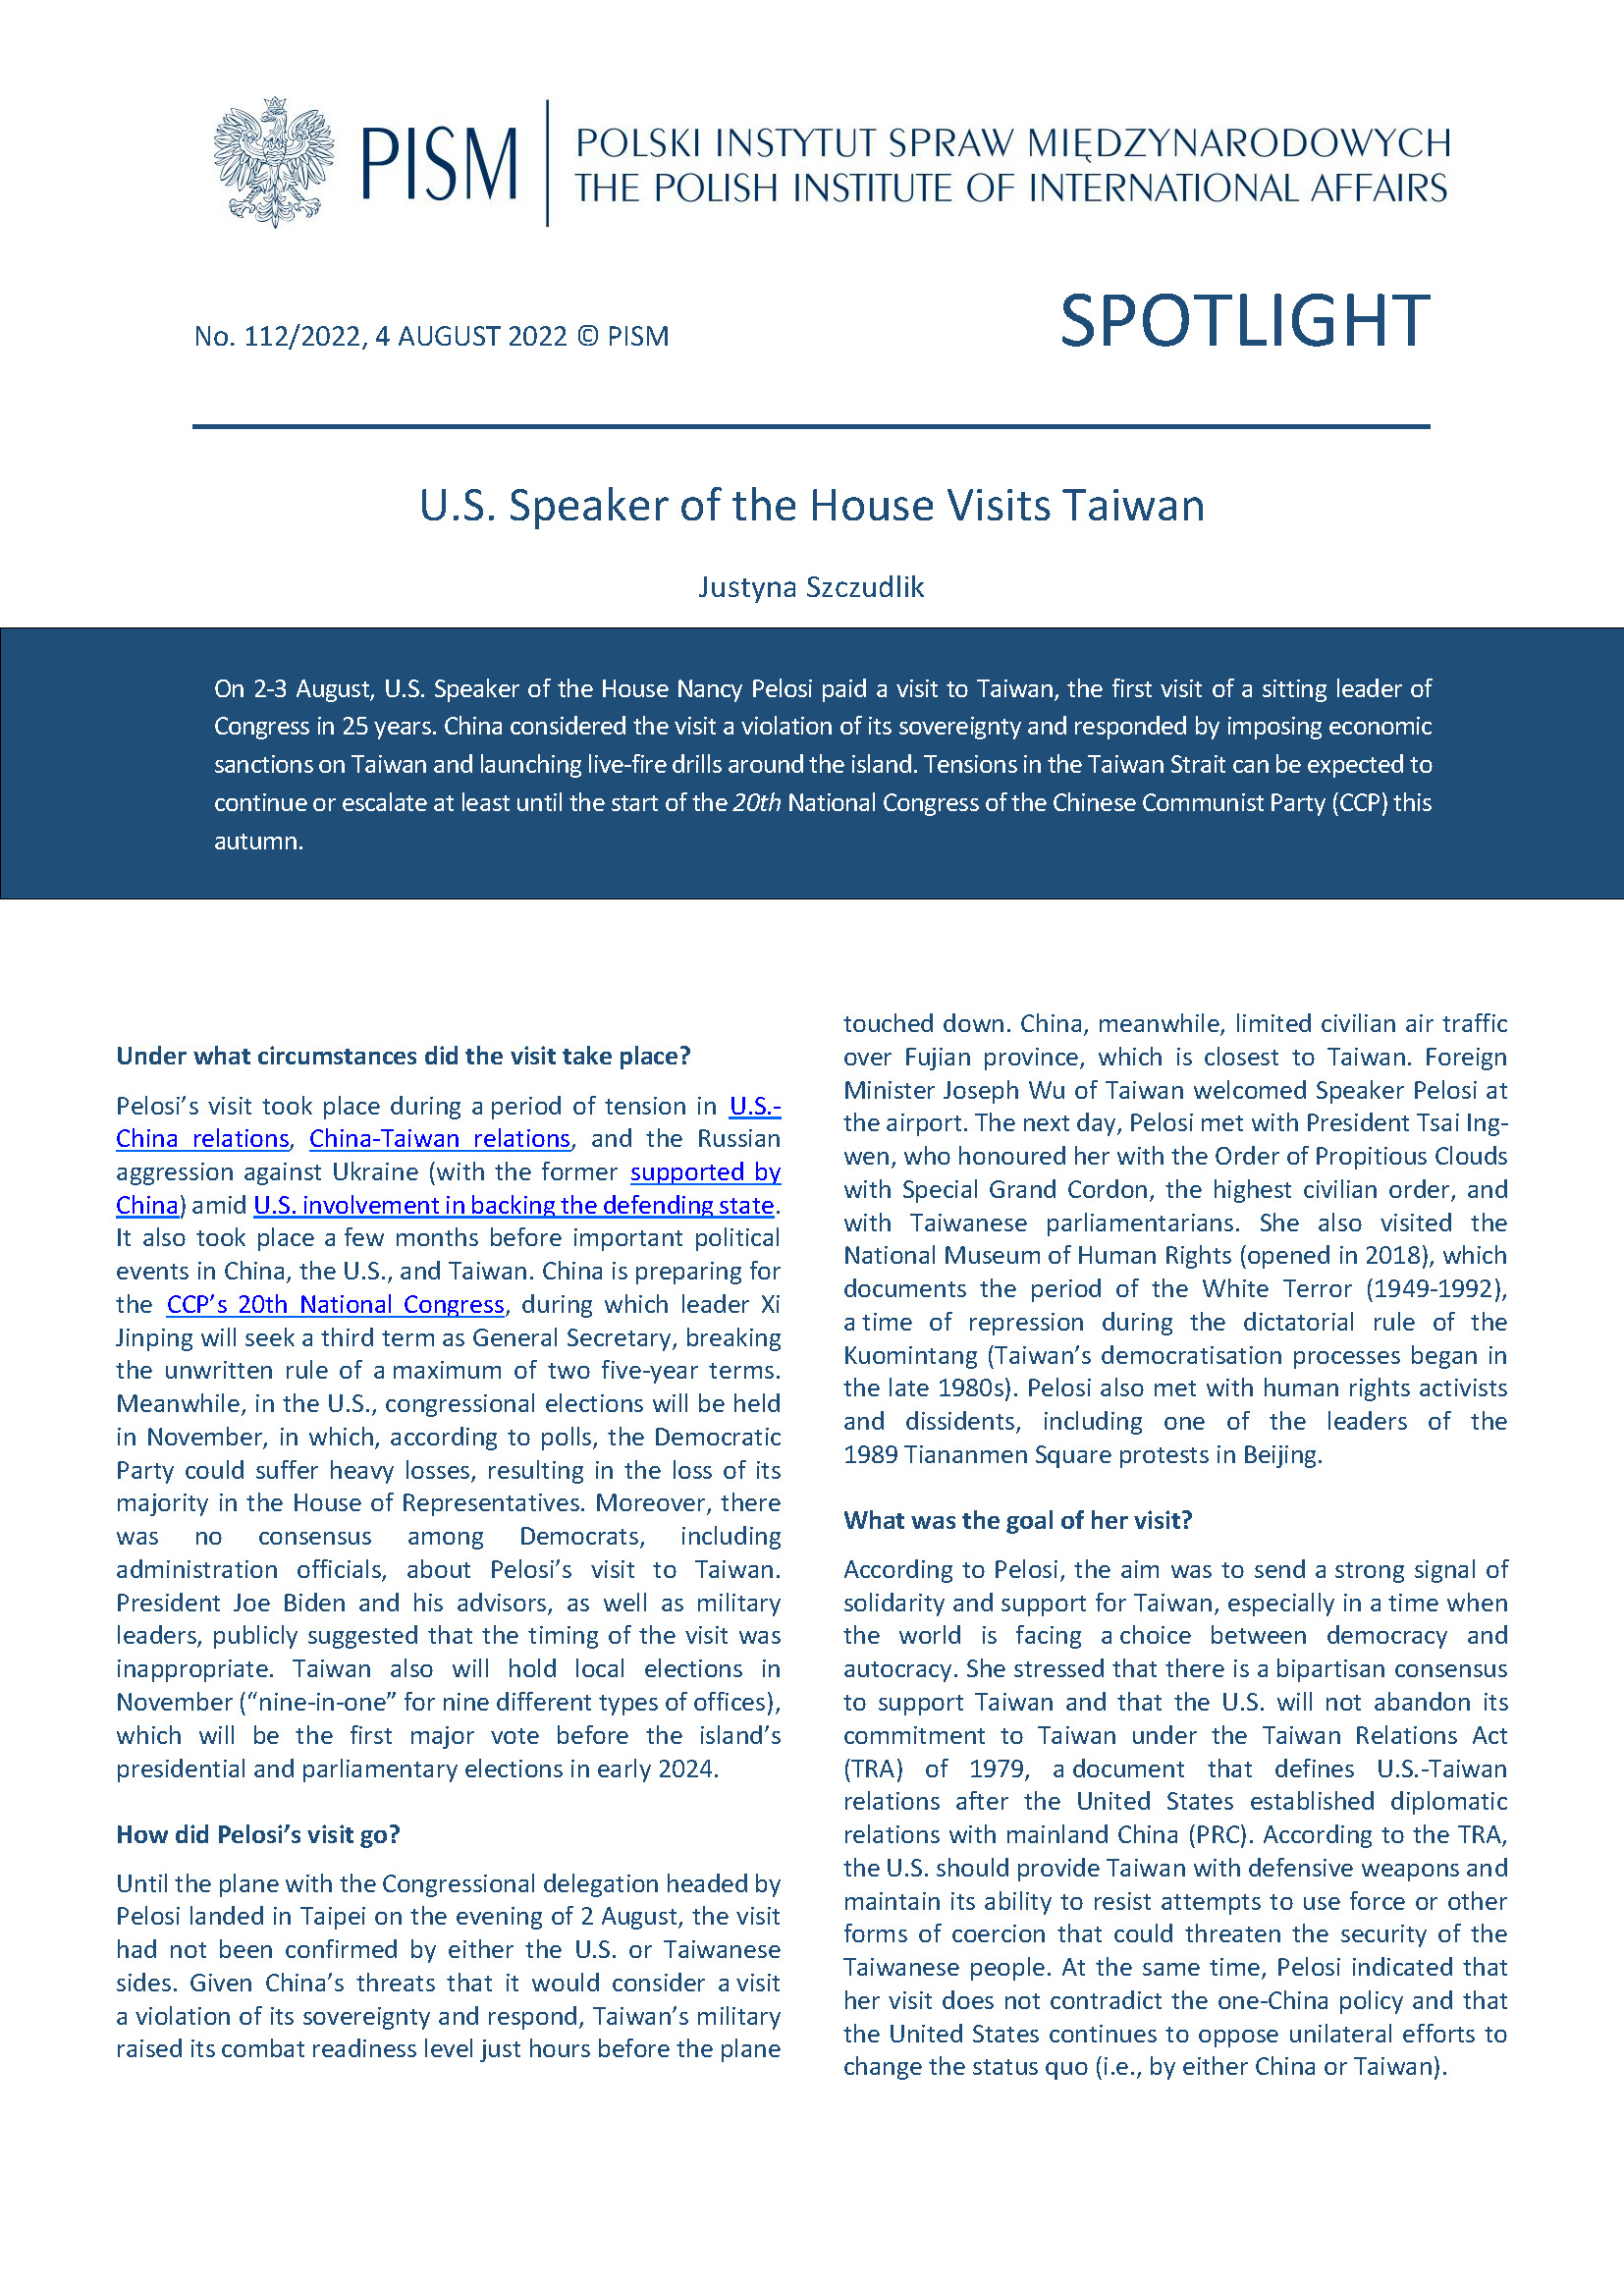 U.S. Speaker of the House Visits Taiwan